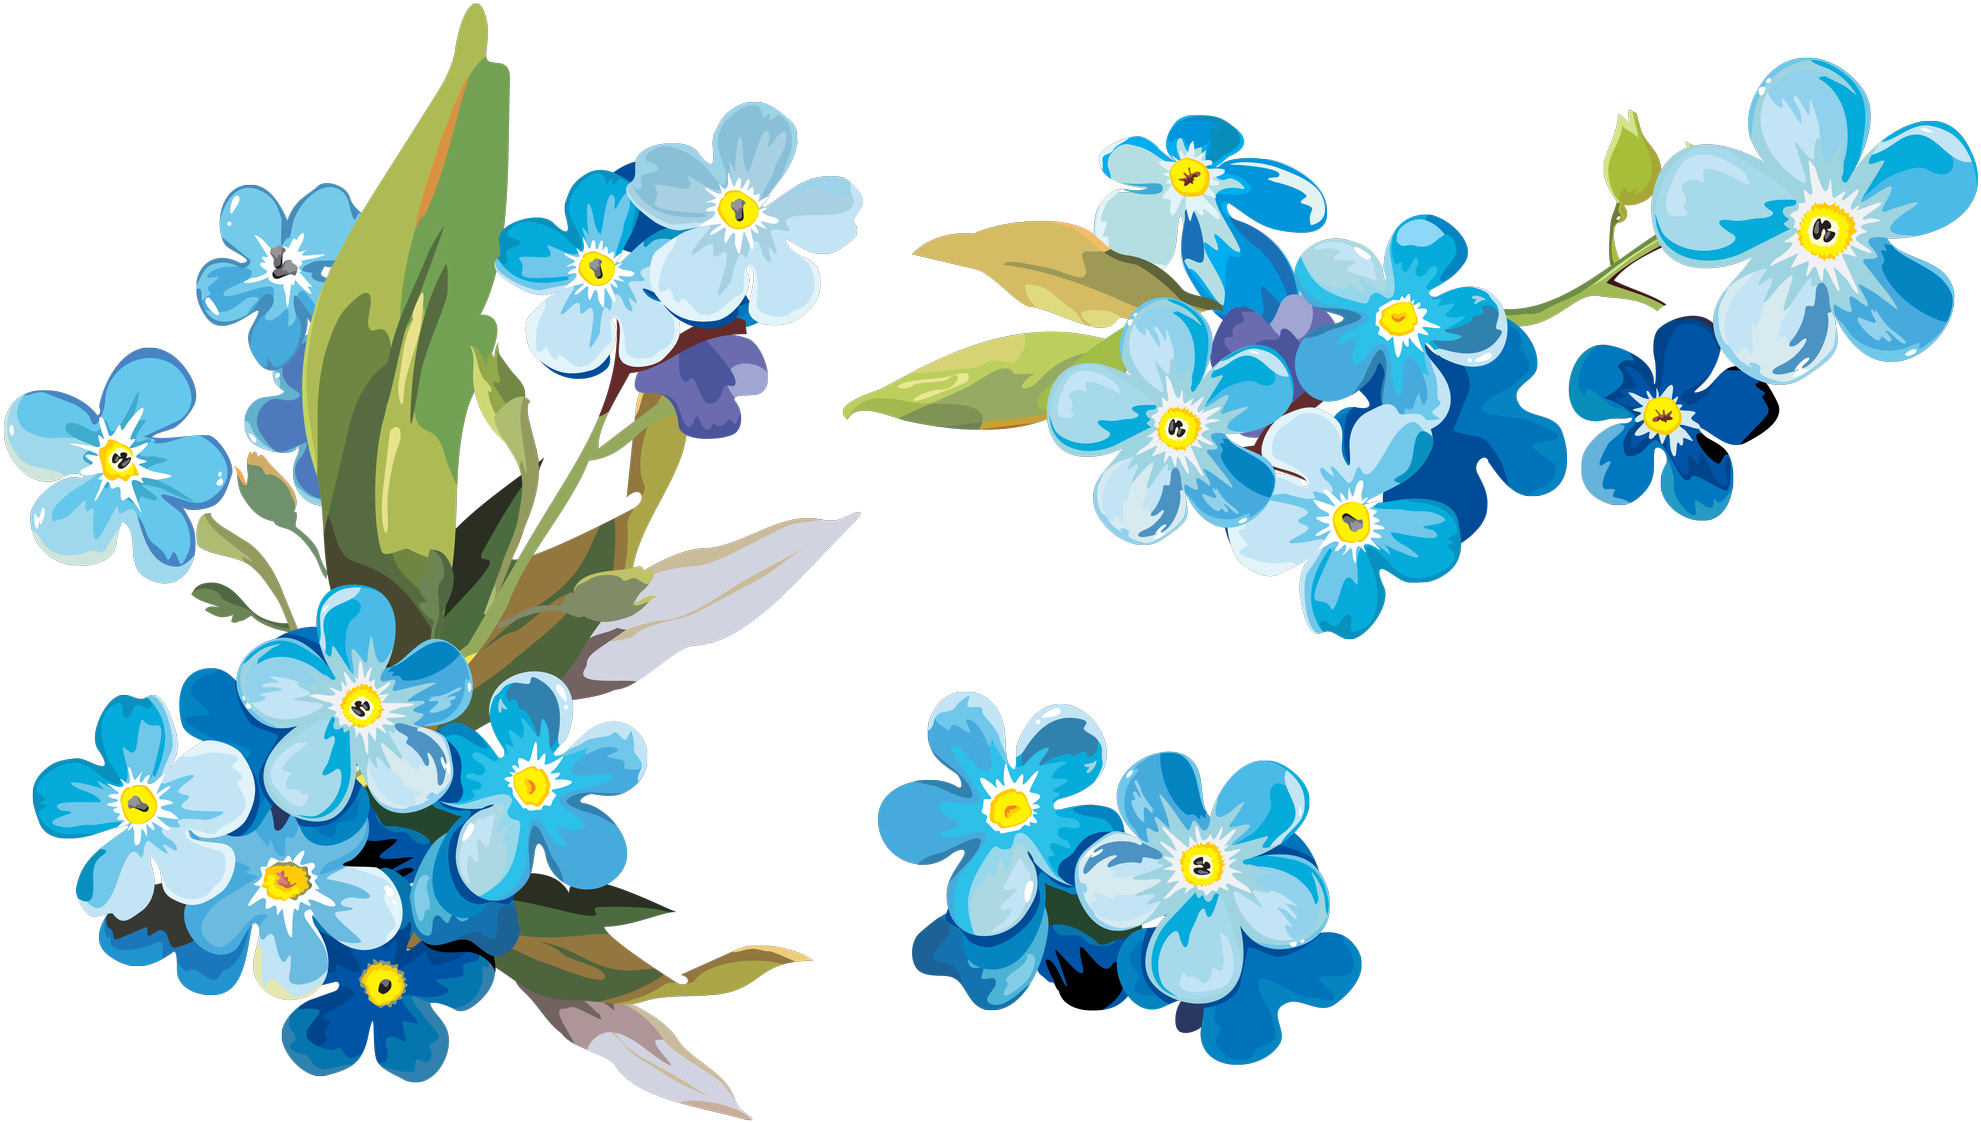 Forget Me Not Blue